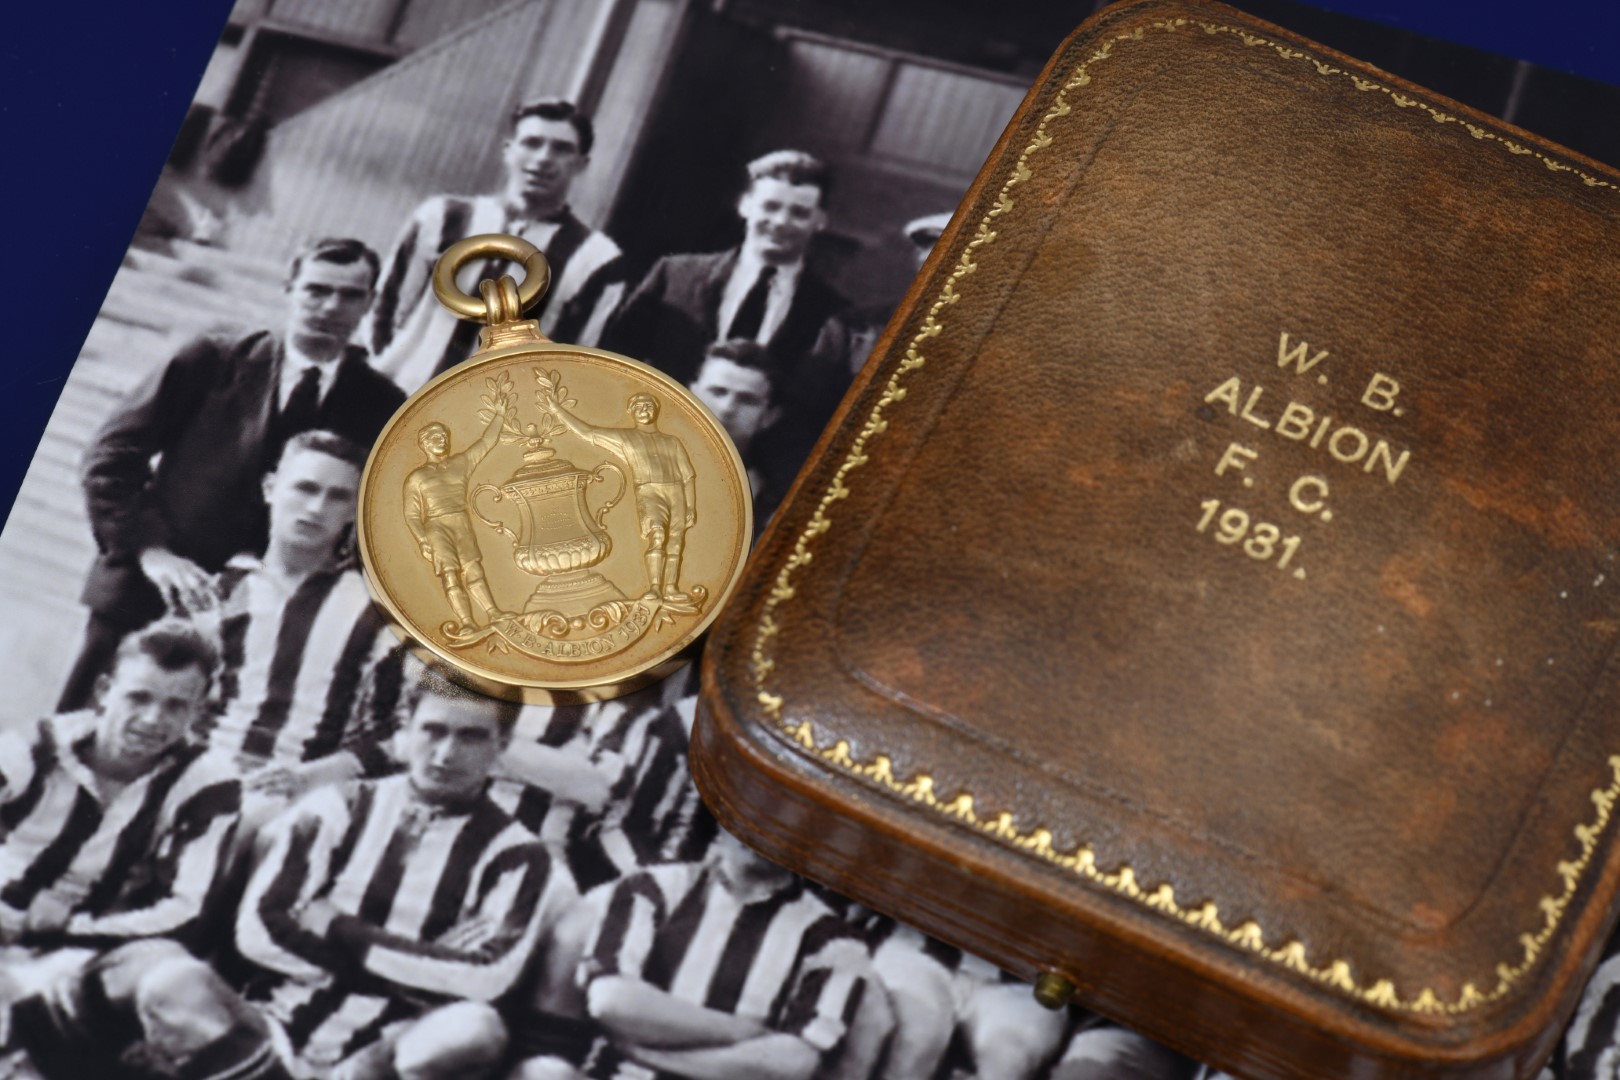 FA Cup winners medal from 1931 awarded to E Smith assistant secretary of West Bromwich Albion